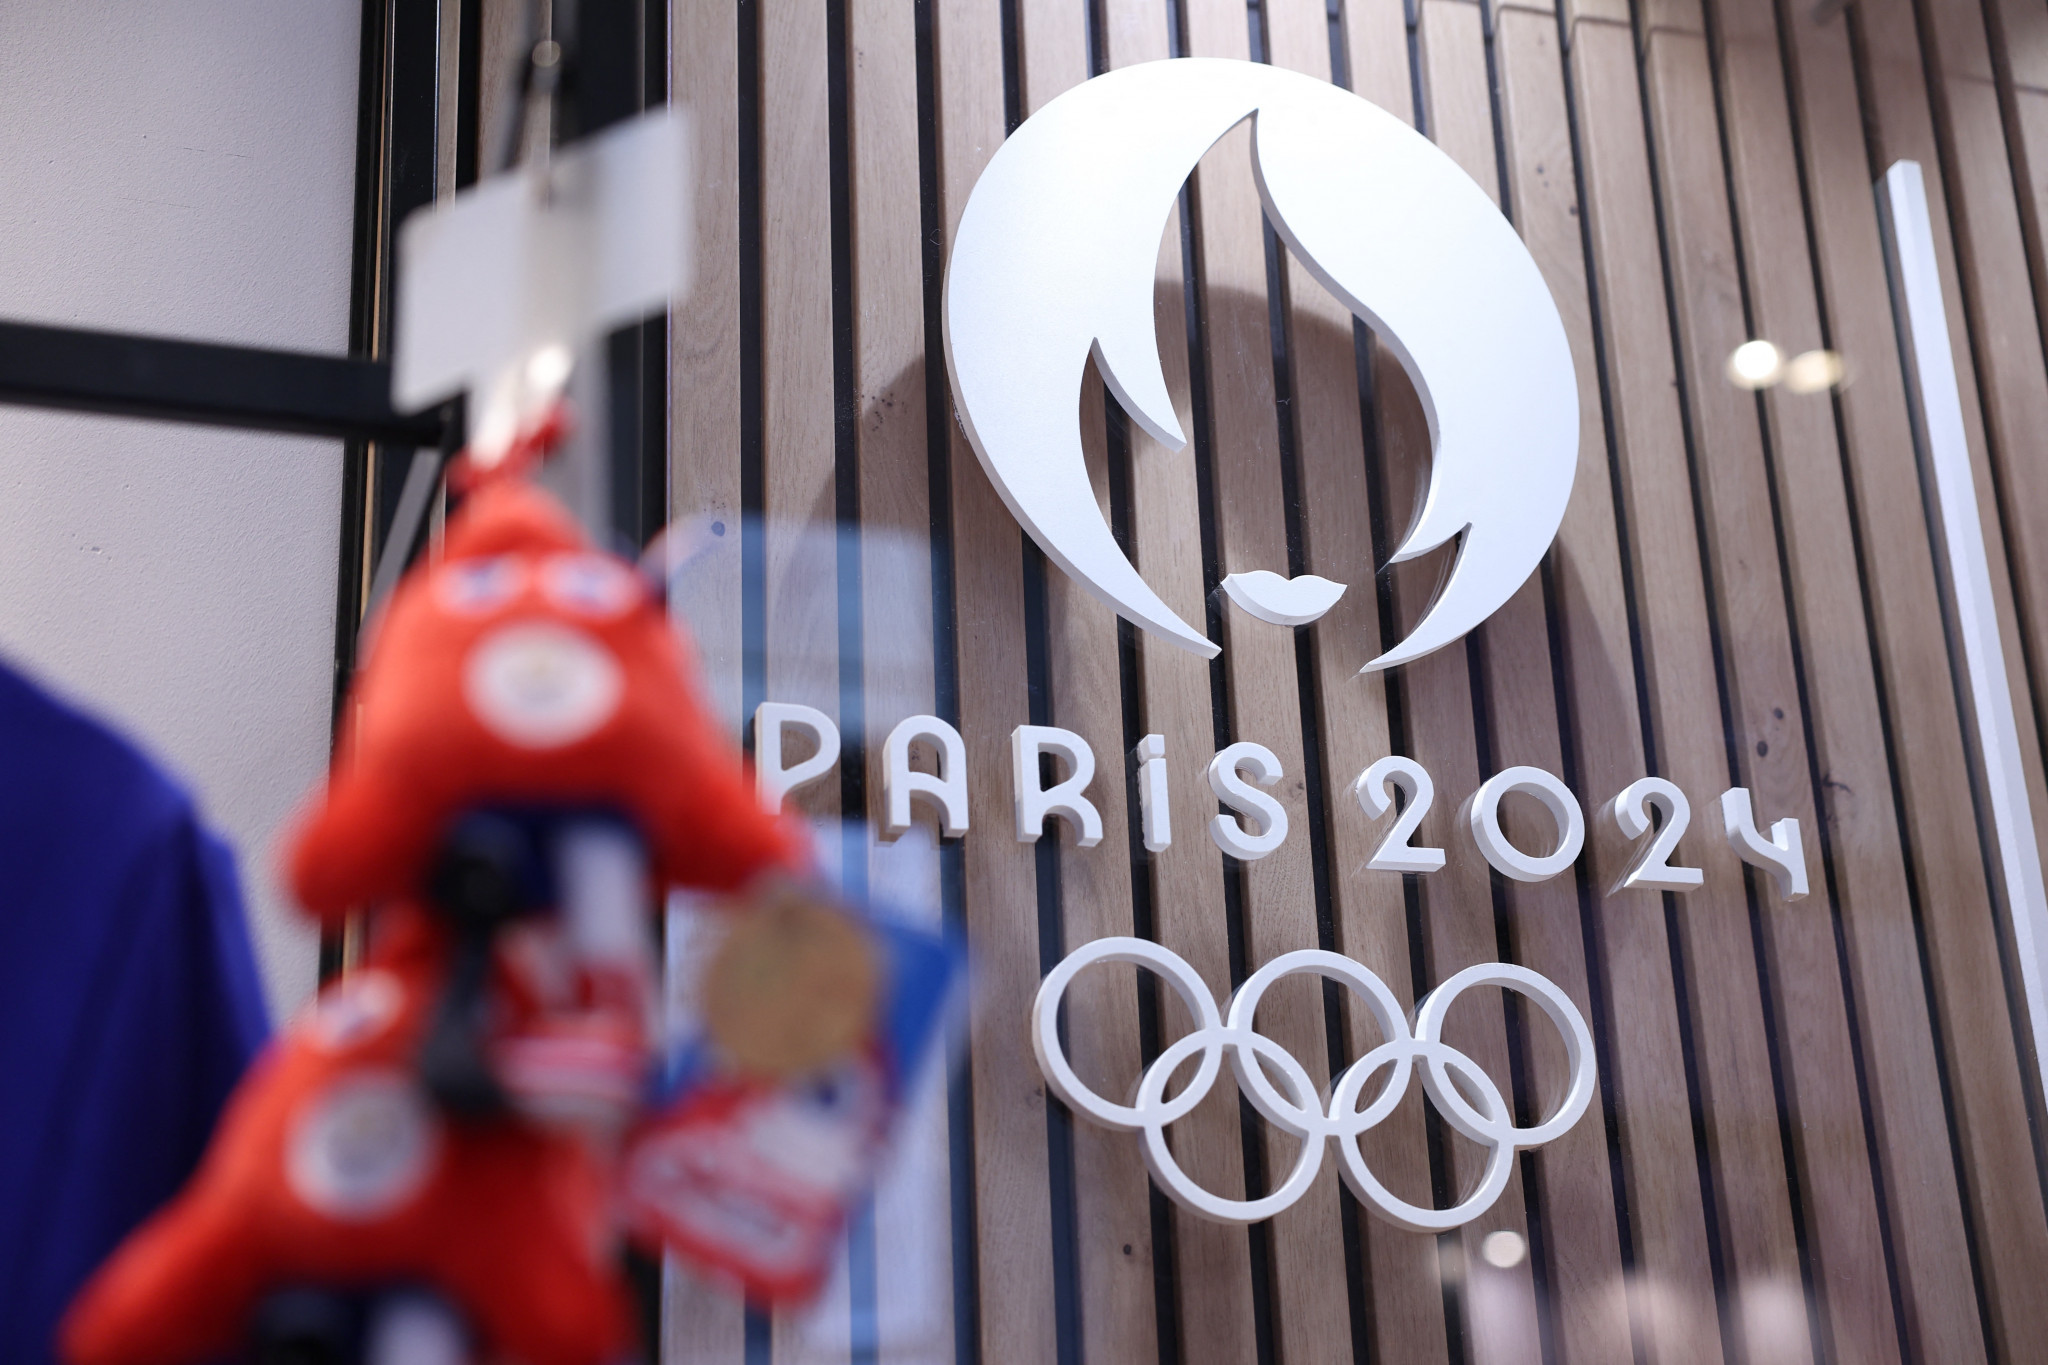 Exclusive: Paris 2024 sports director Gatien resigns due to personal reasons